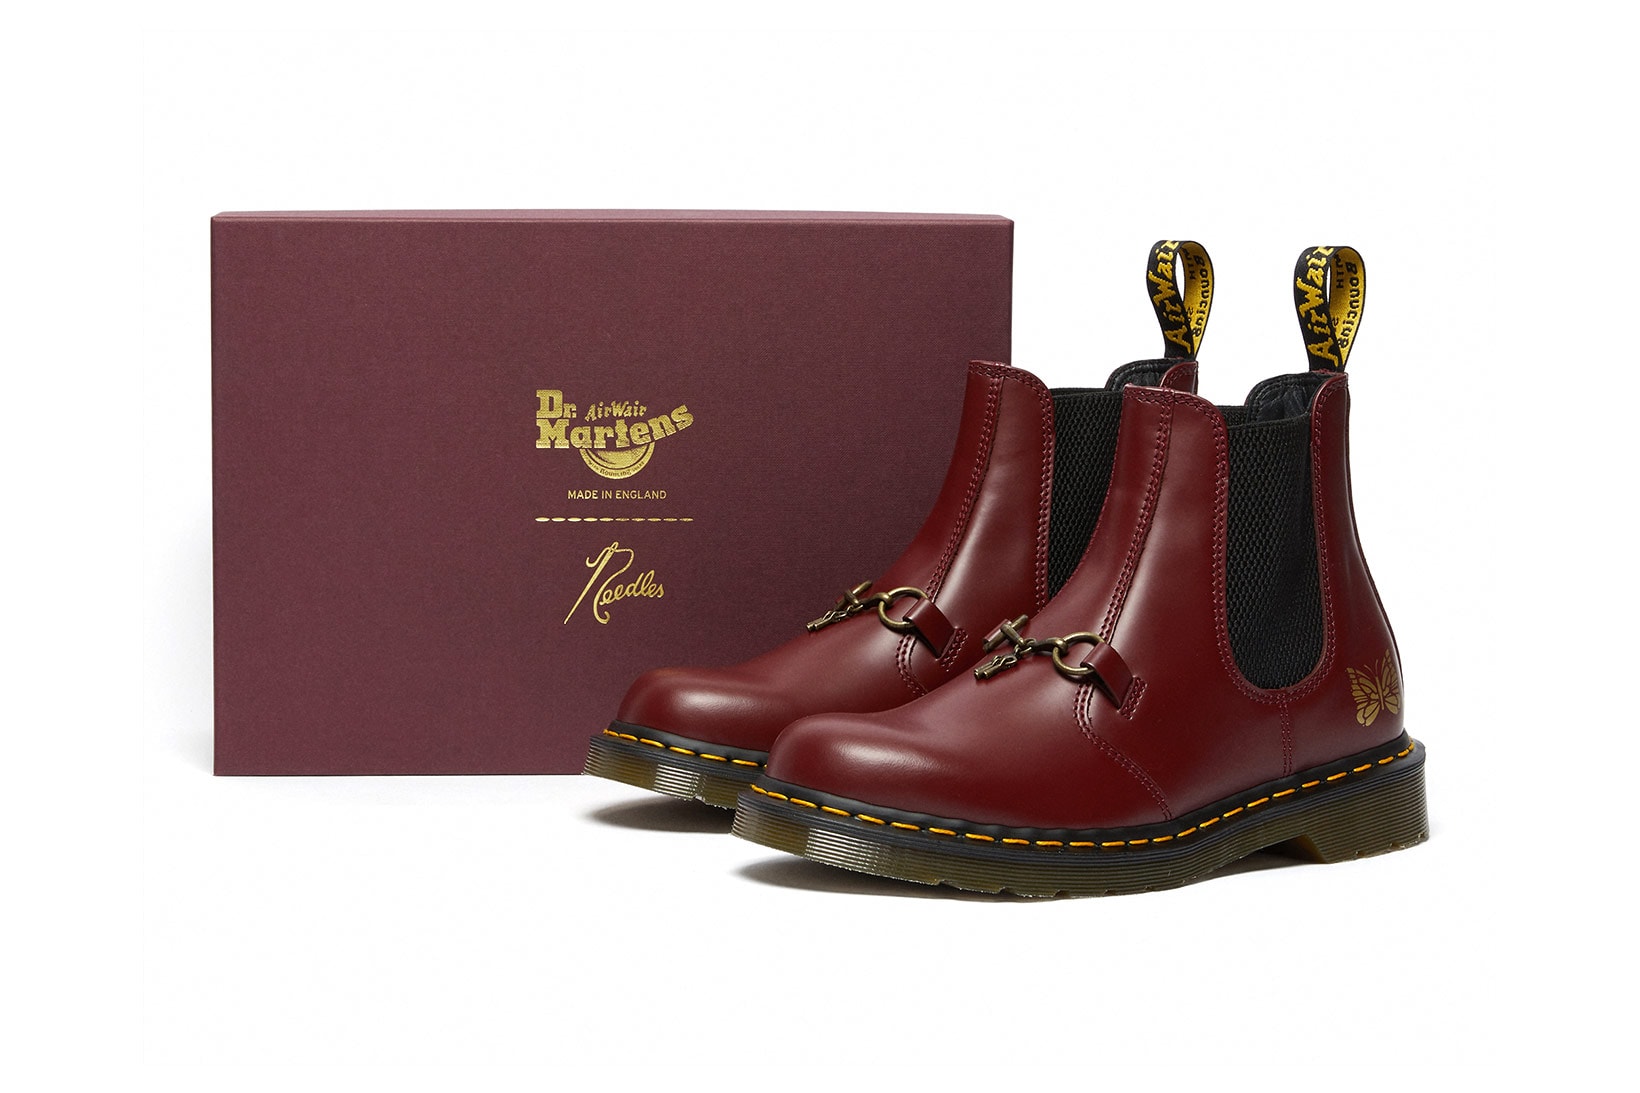 dr martens needles 2976 chelsea boot collaboration cherry red colorway box